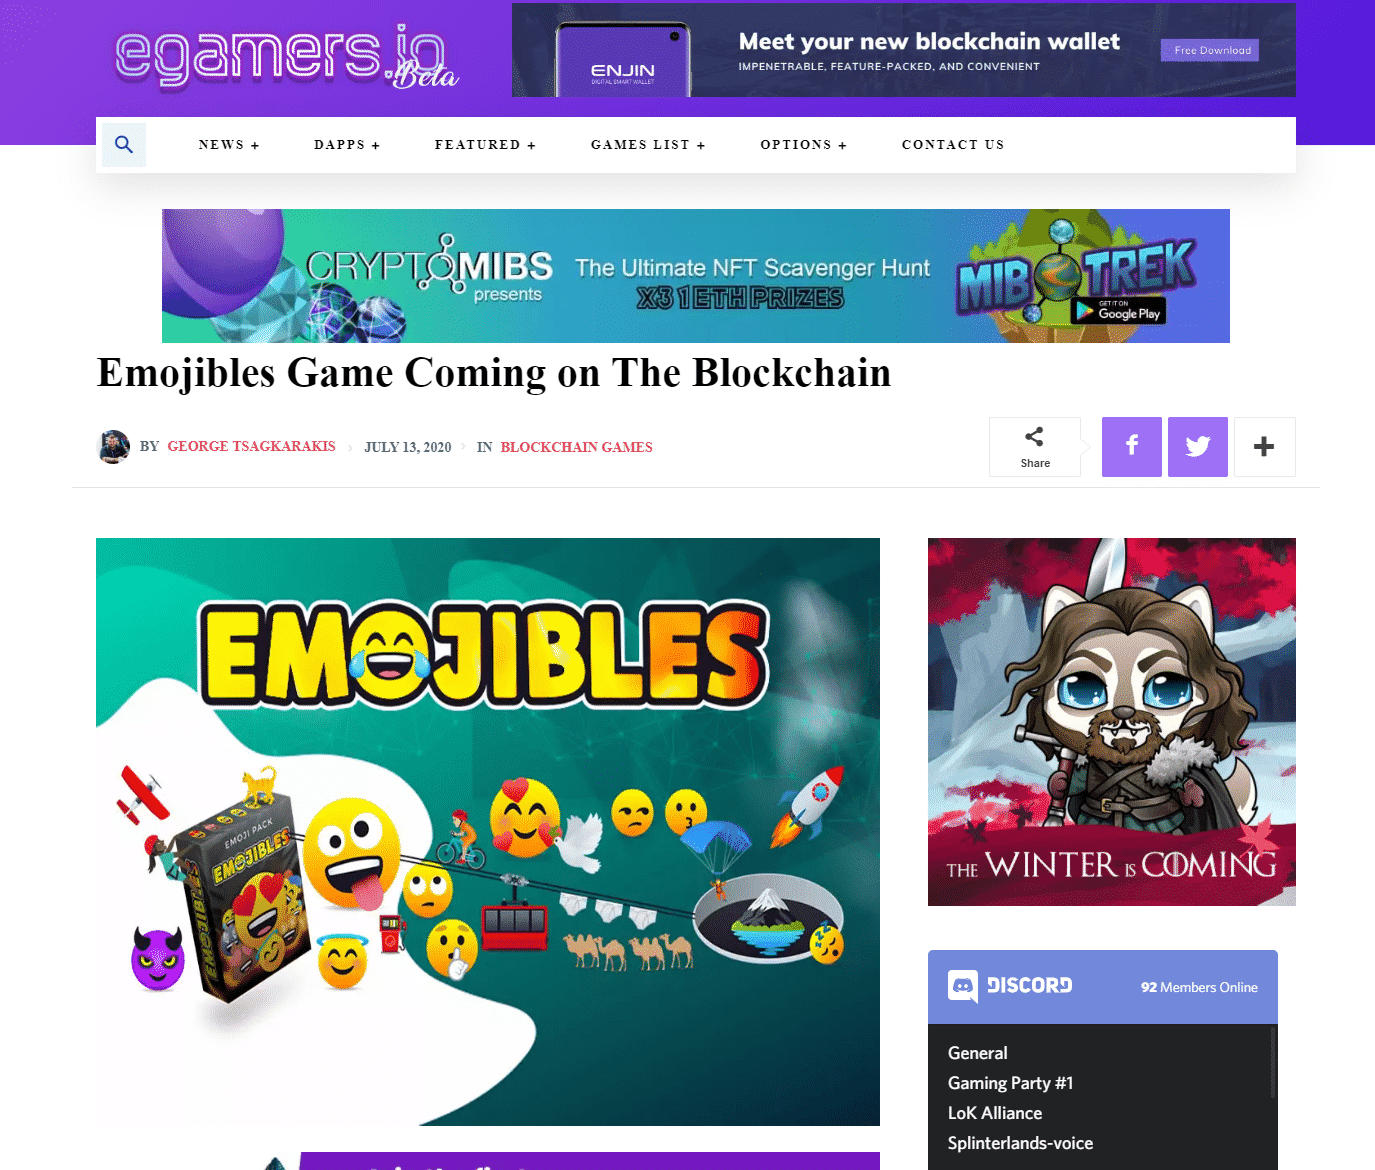 Emojibles Game Coming on The Blockchain